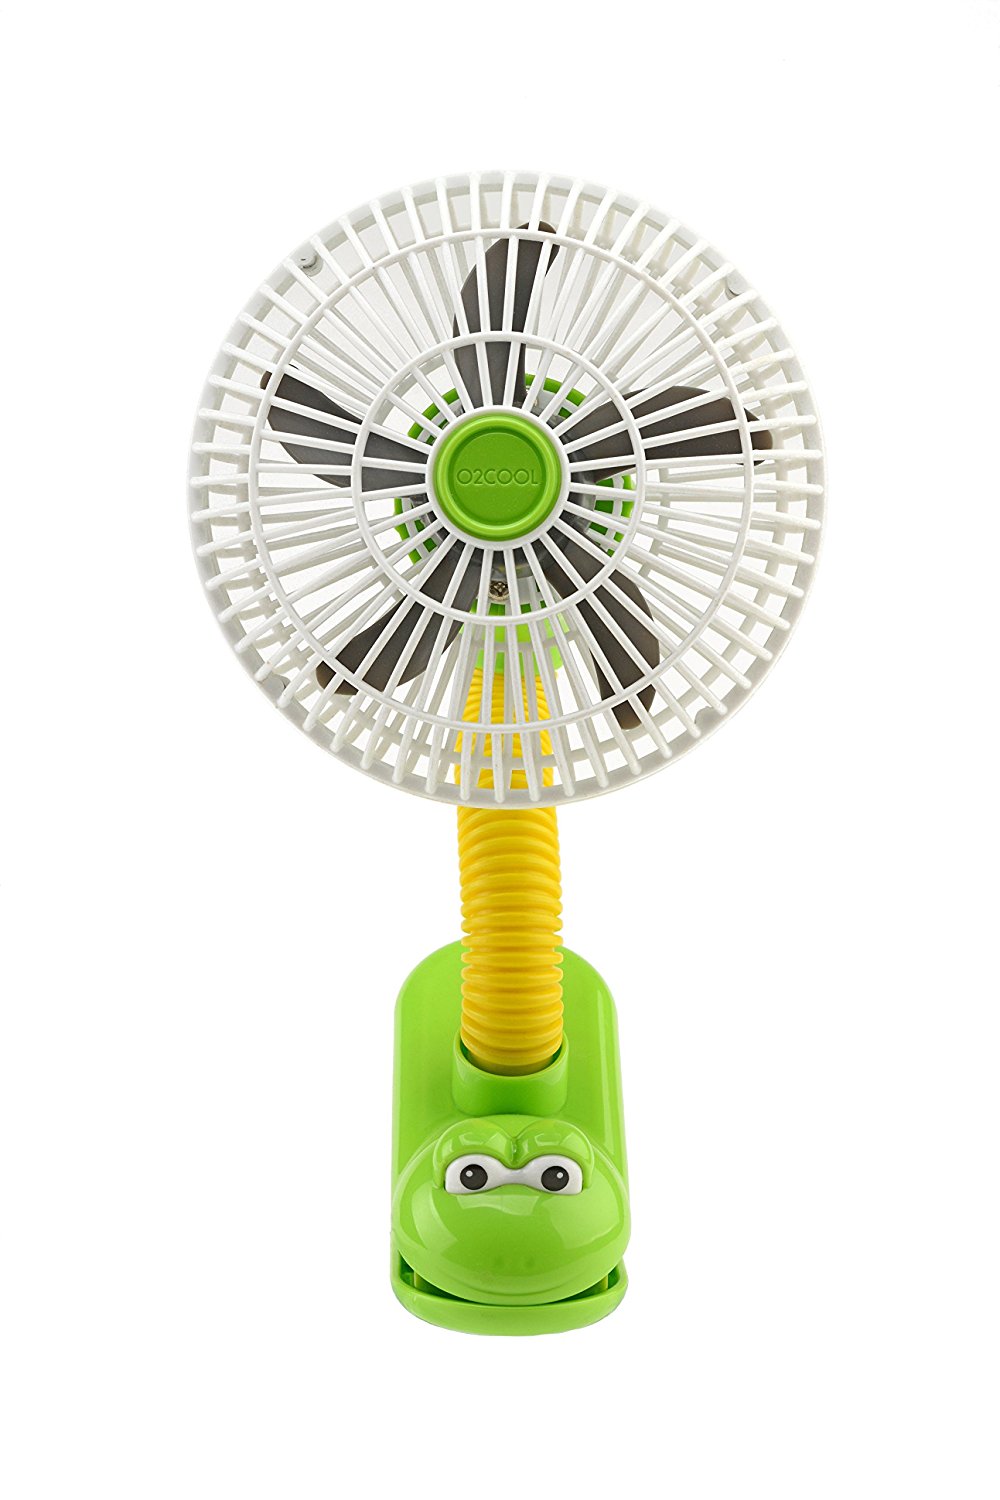 O2COOL 4-Inch Portable Clip Fan – Frog – Just $11.23!